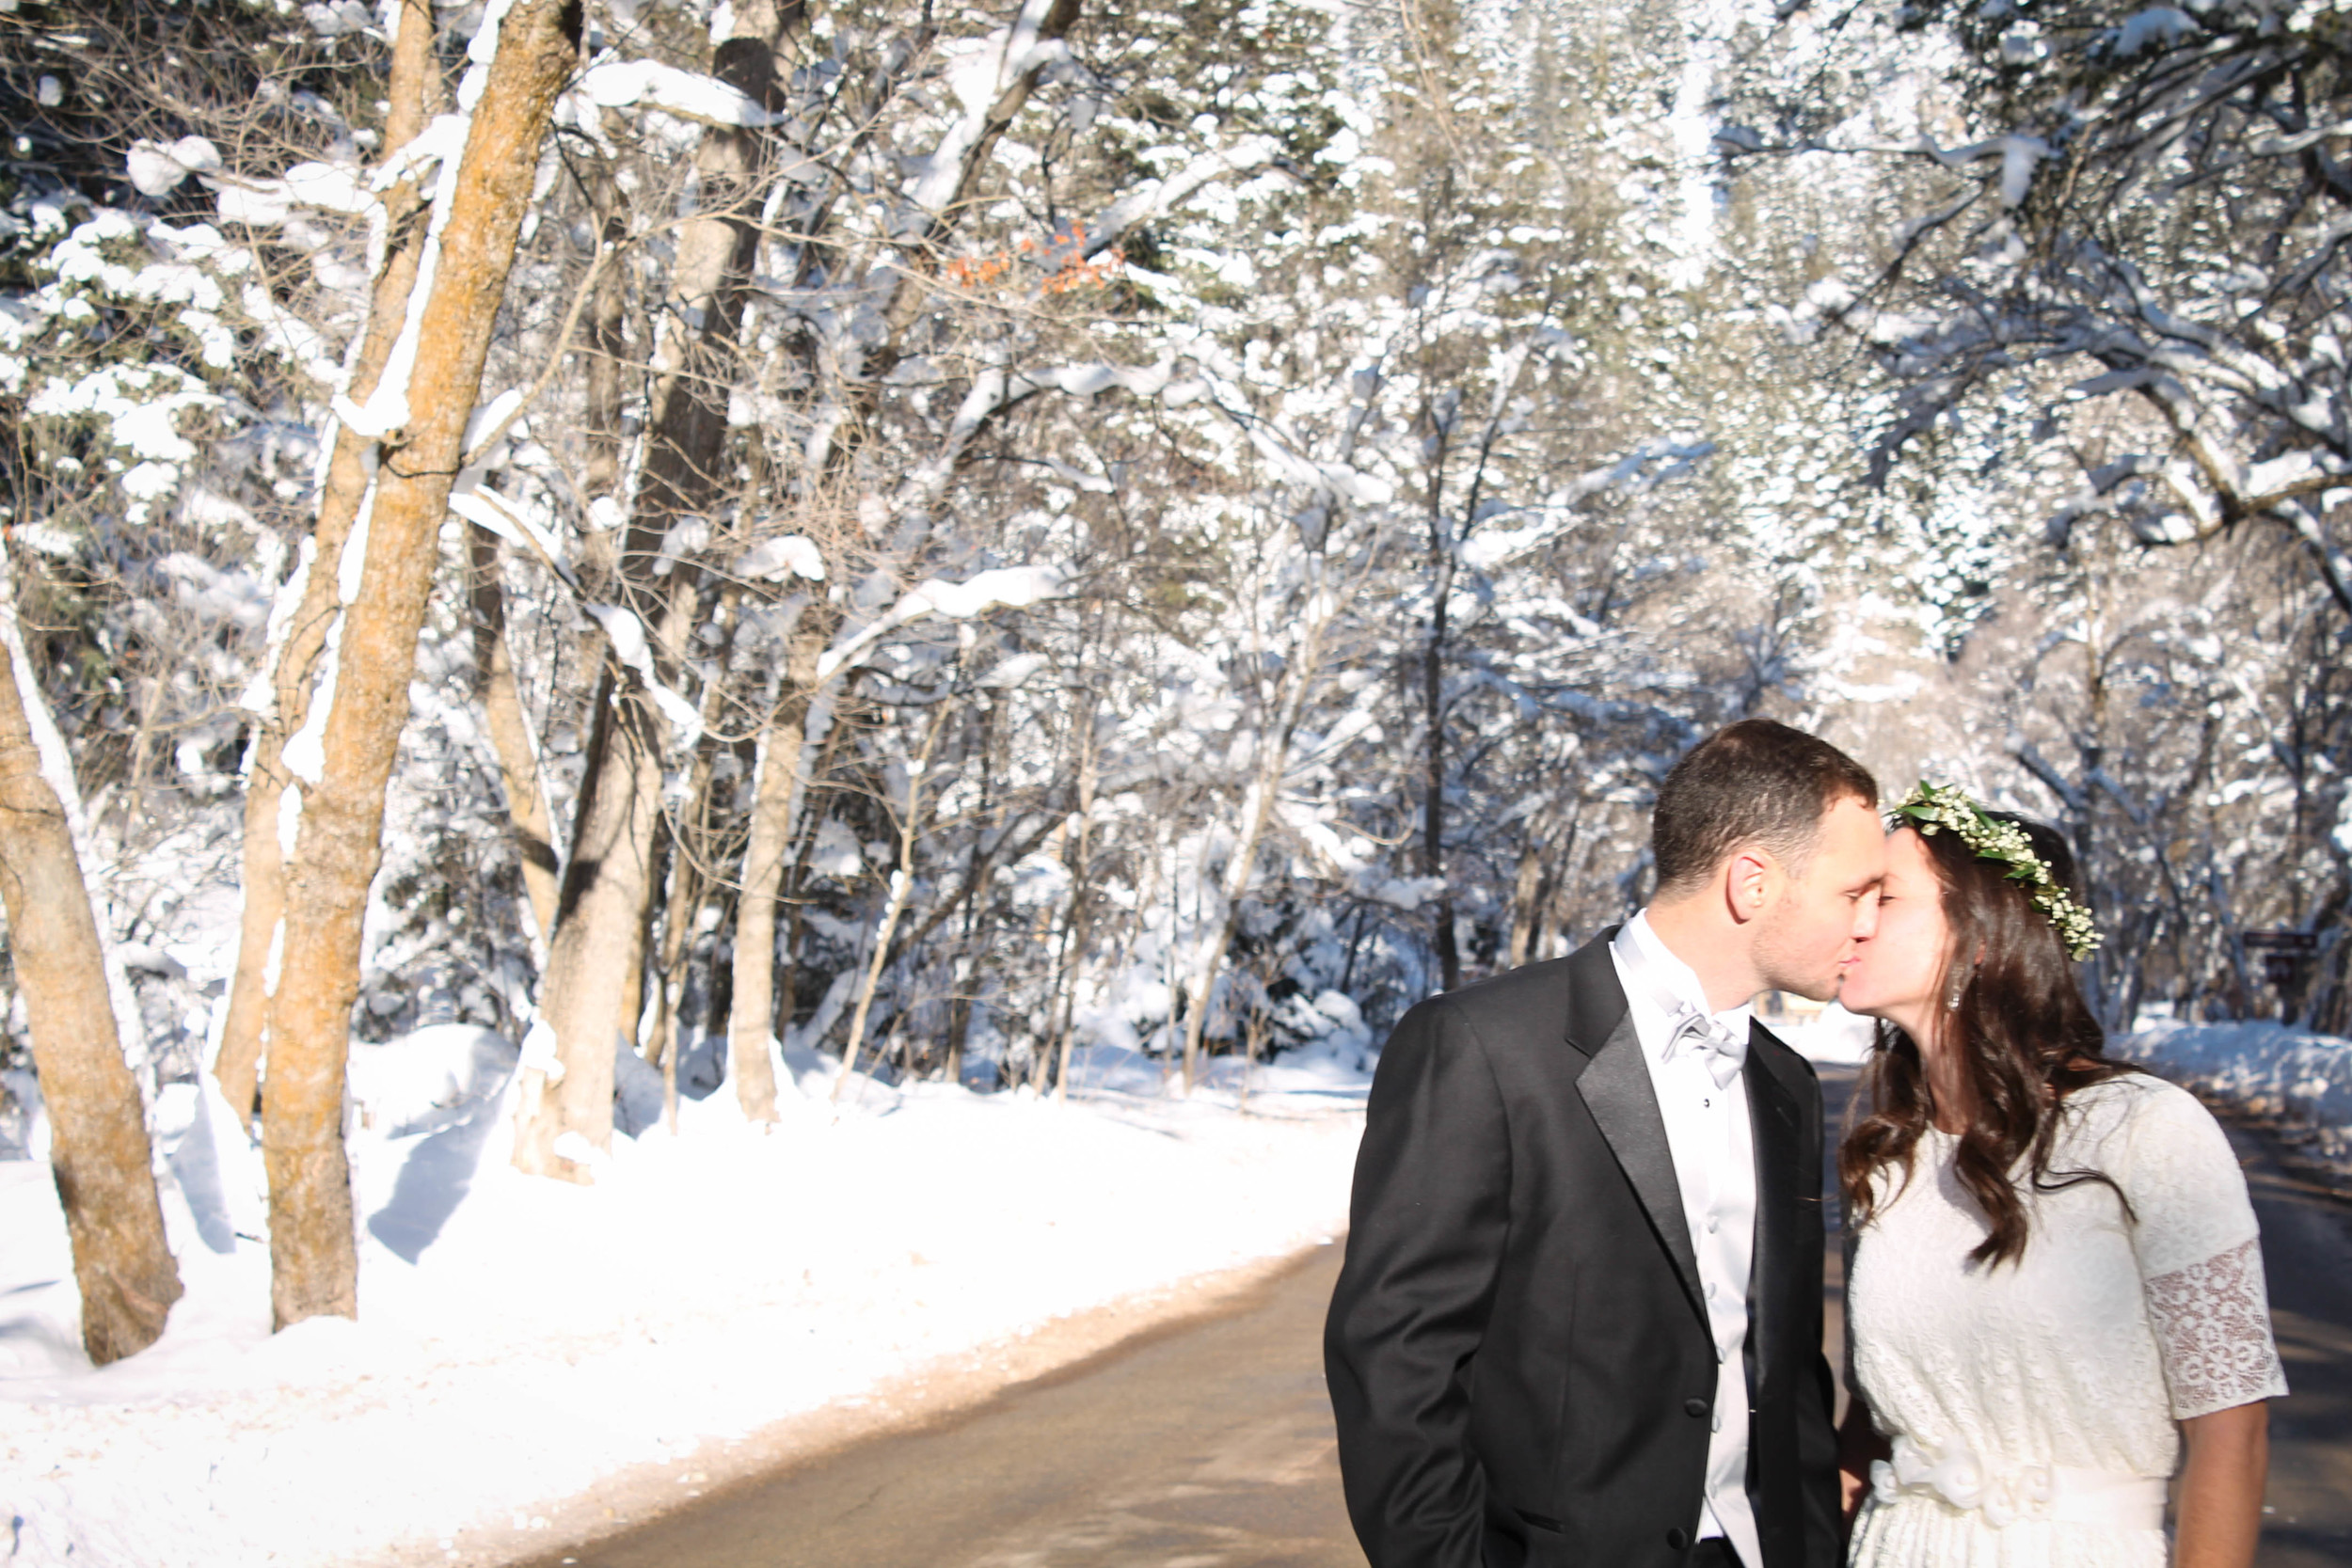 Bridals Photo Sessions in Utah by Captured By Lexi